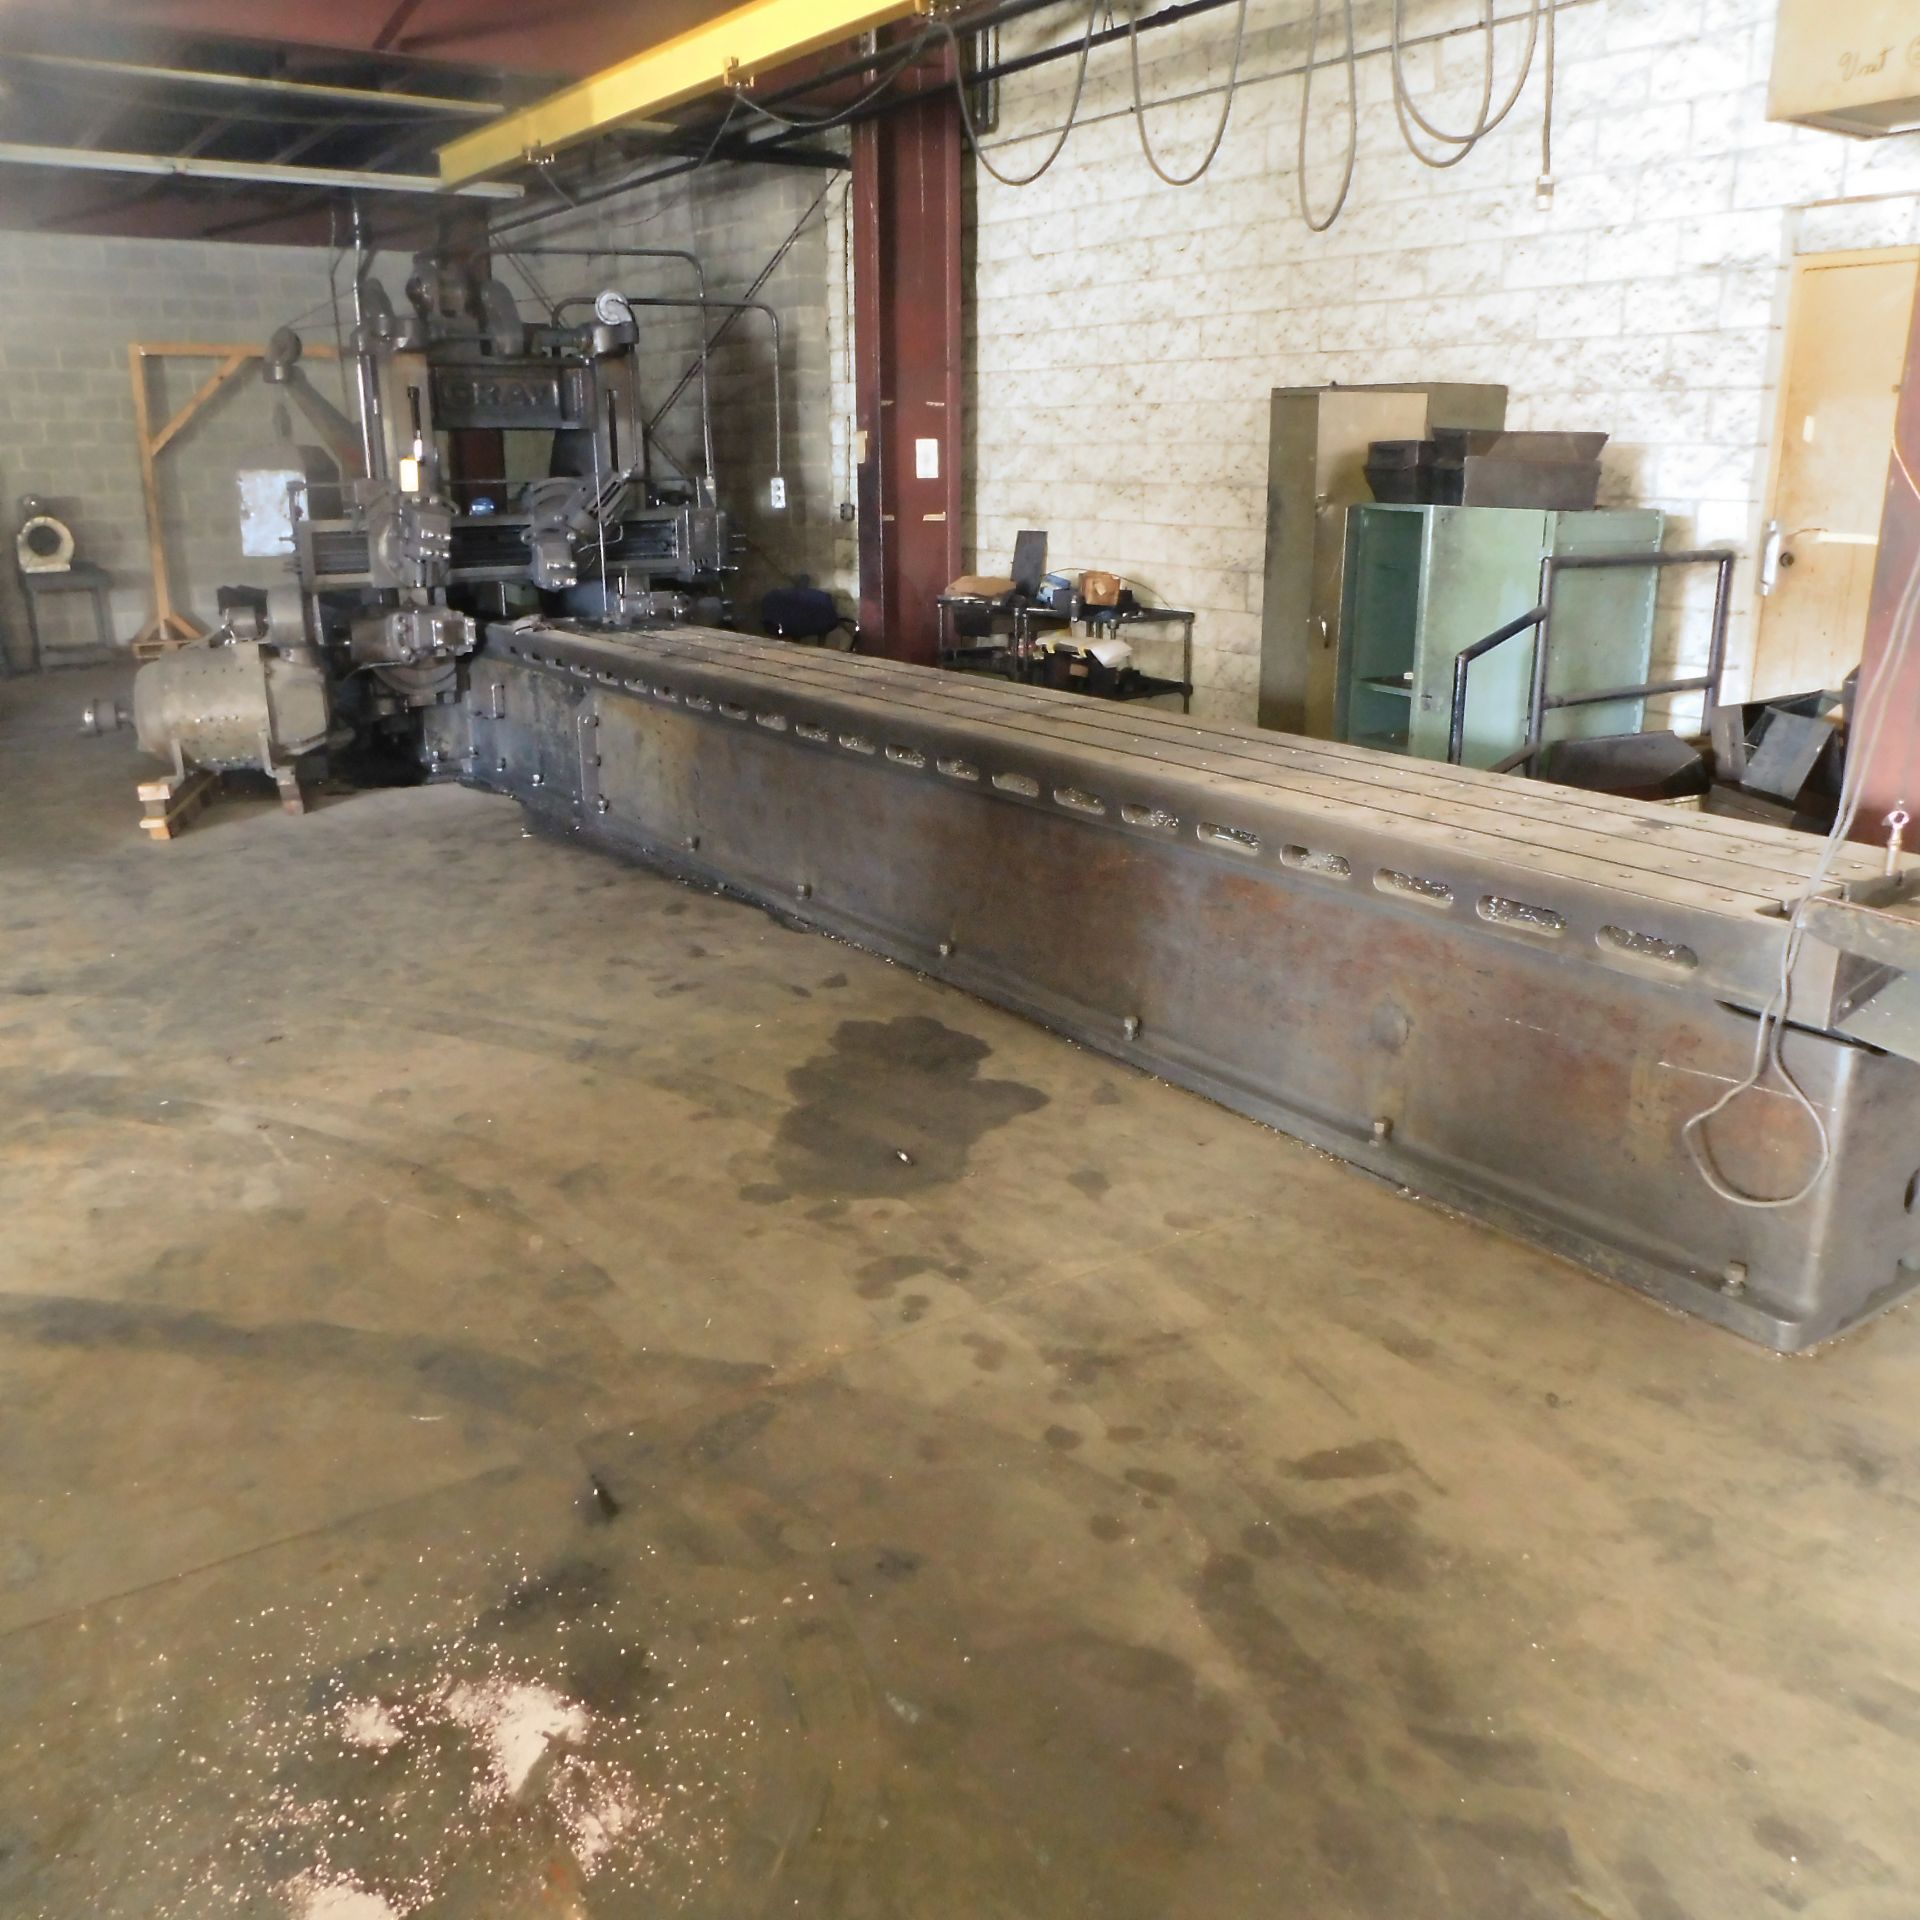 Gray Planer, 34" X 282" Table, (2) Vertical Heads, (2) Side Heads, Estimated 30" Max. Under the